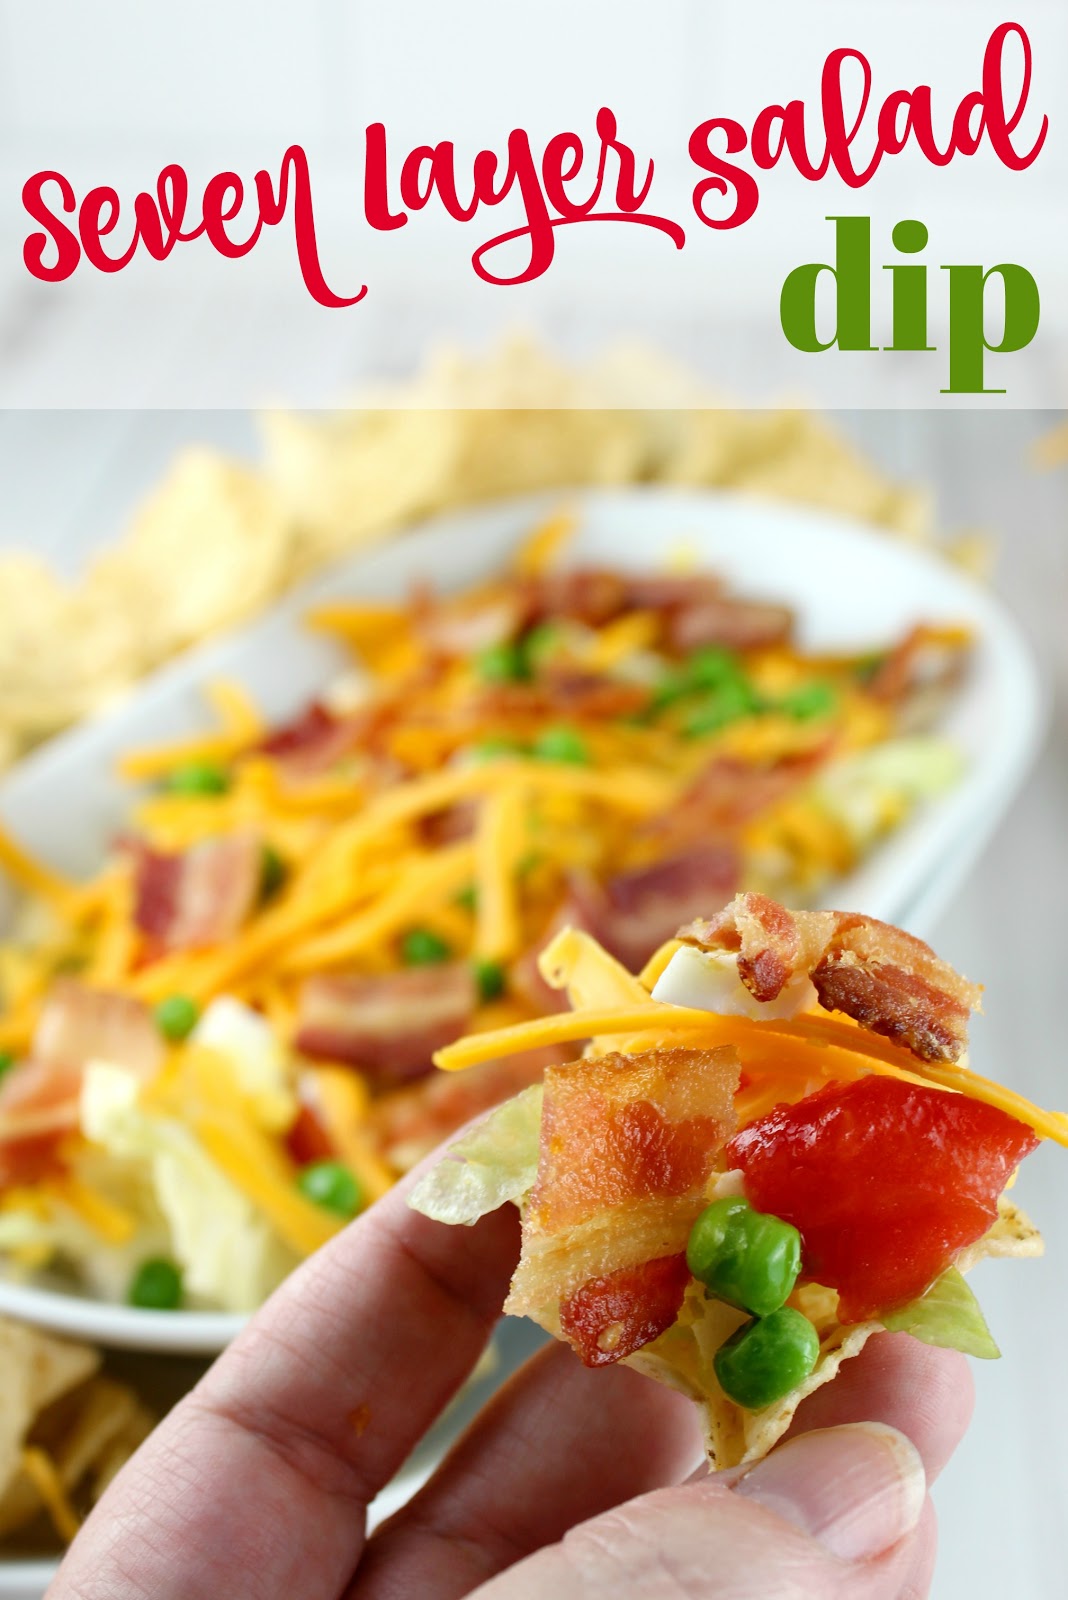 seven layer salad dip - peas, bacon, eggs, and more! make your favorite salad into a dip